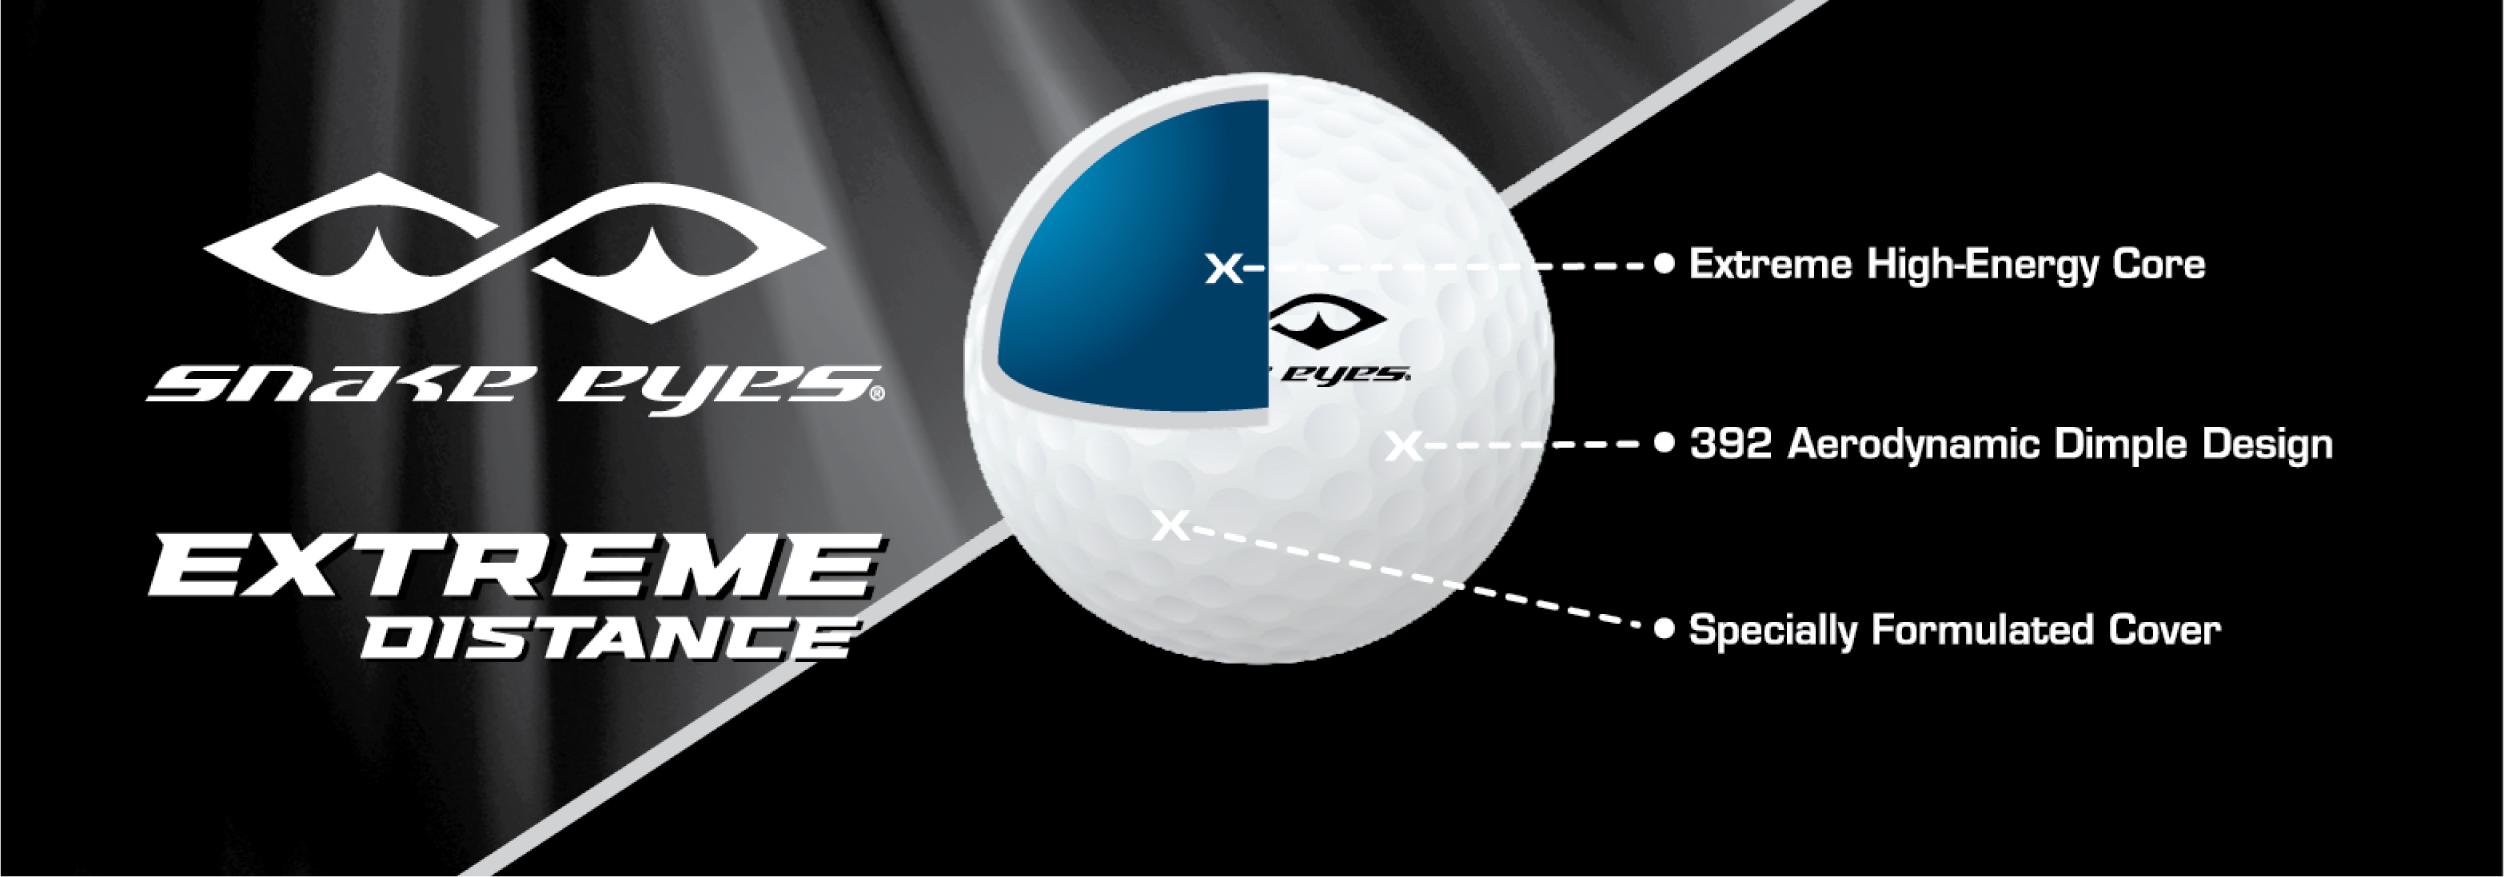 New Snake Eyes Extreme Distance Golf Balls LOGO ONLY 2